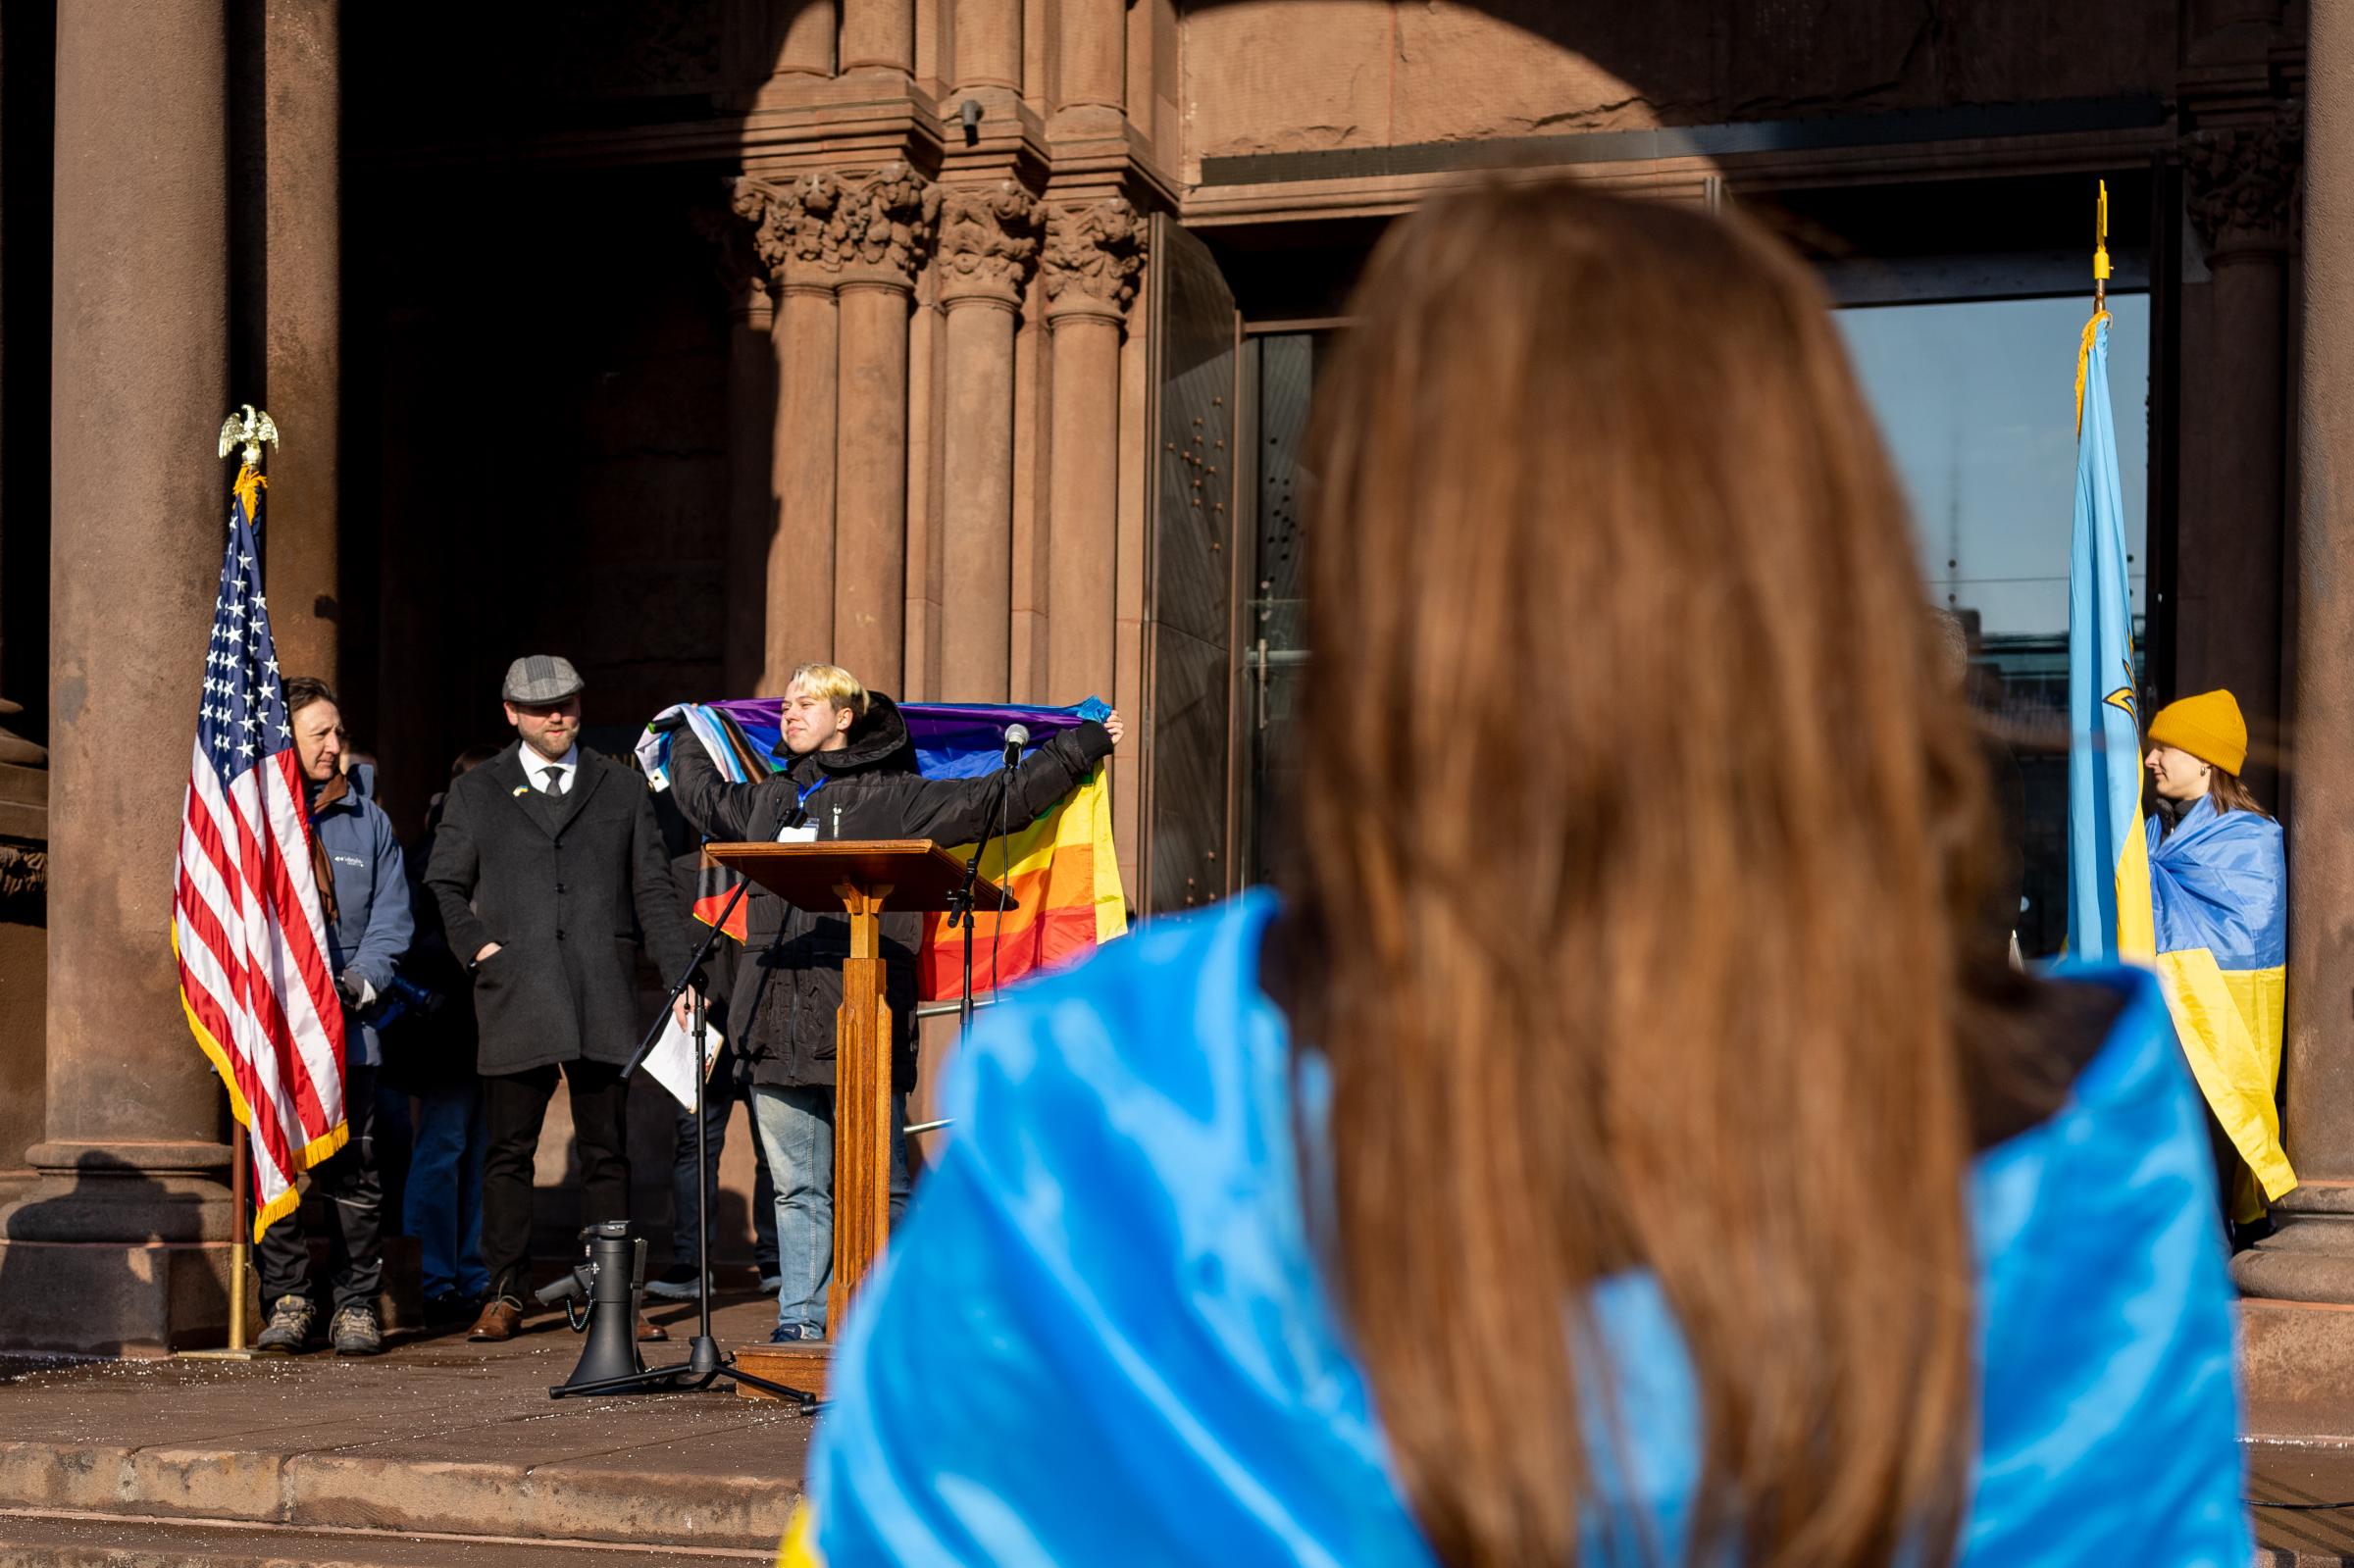 Demonstrators Gather at Copley Square in Support of Ukraine, Exactly a Year Since Russia's Invasion - A member of the LGBTQ community, Sashko Horokh displays their rainbow flag as demonstrators cheer...